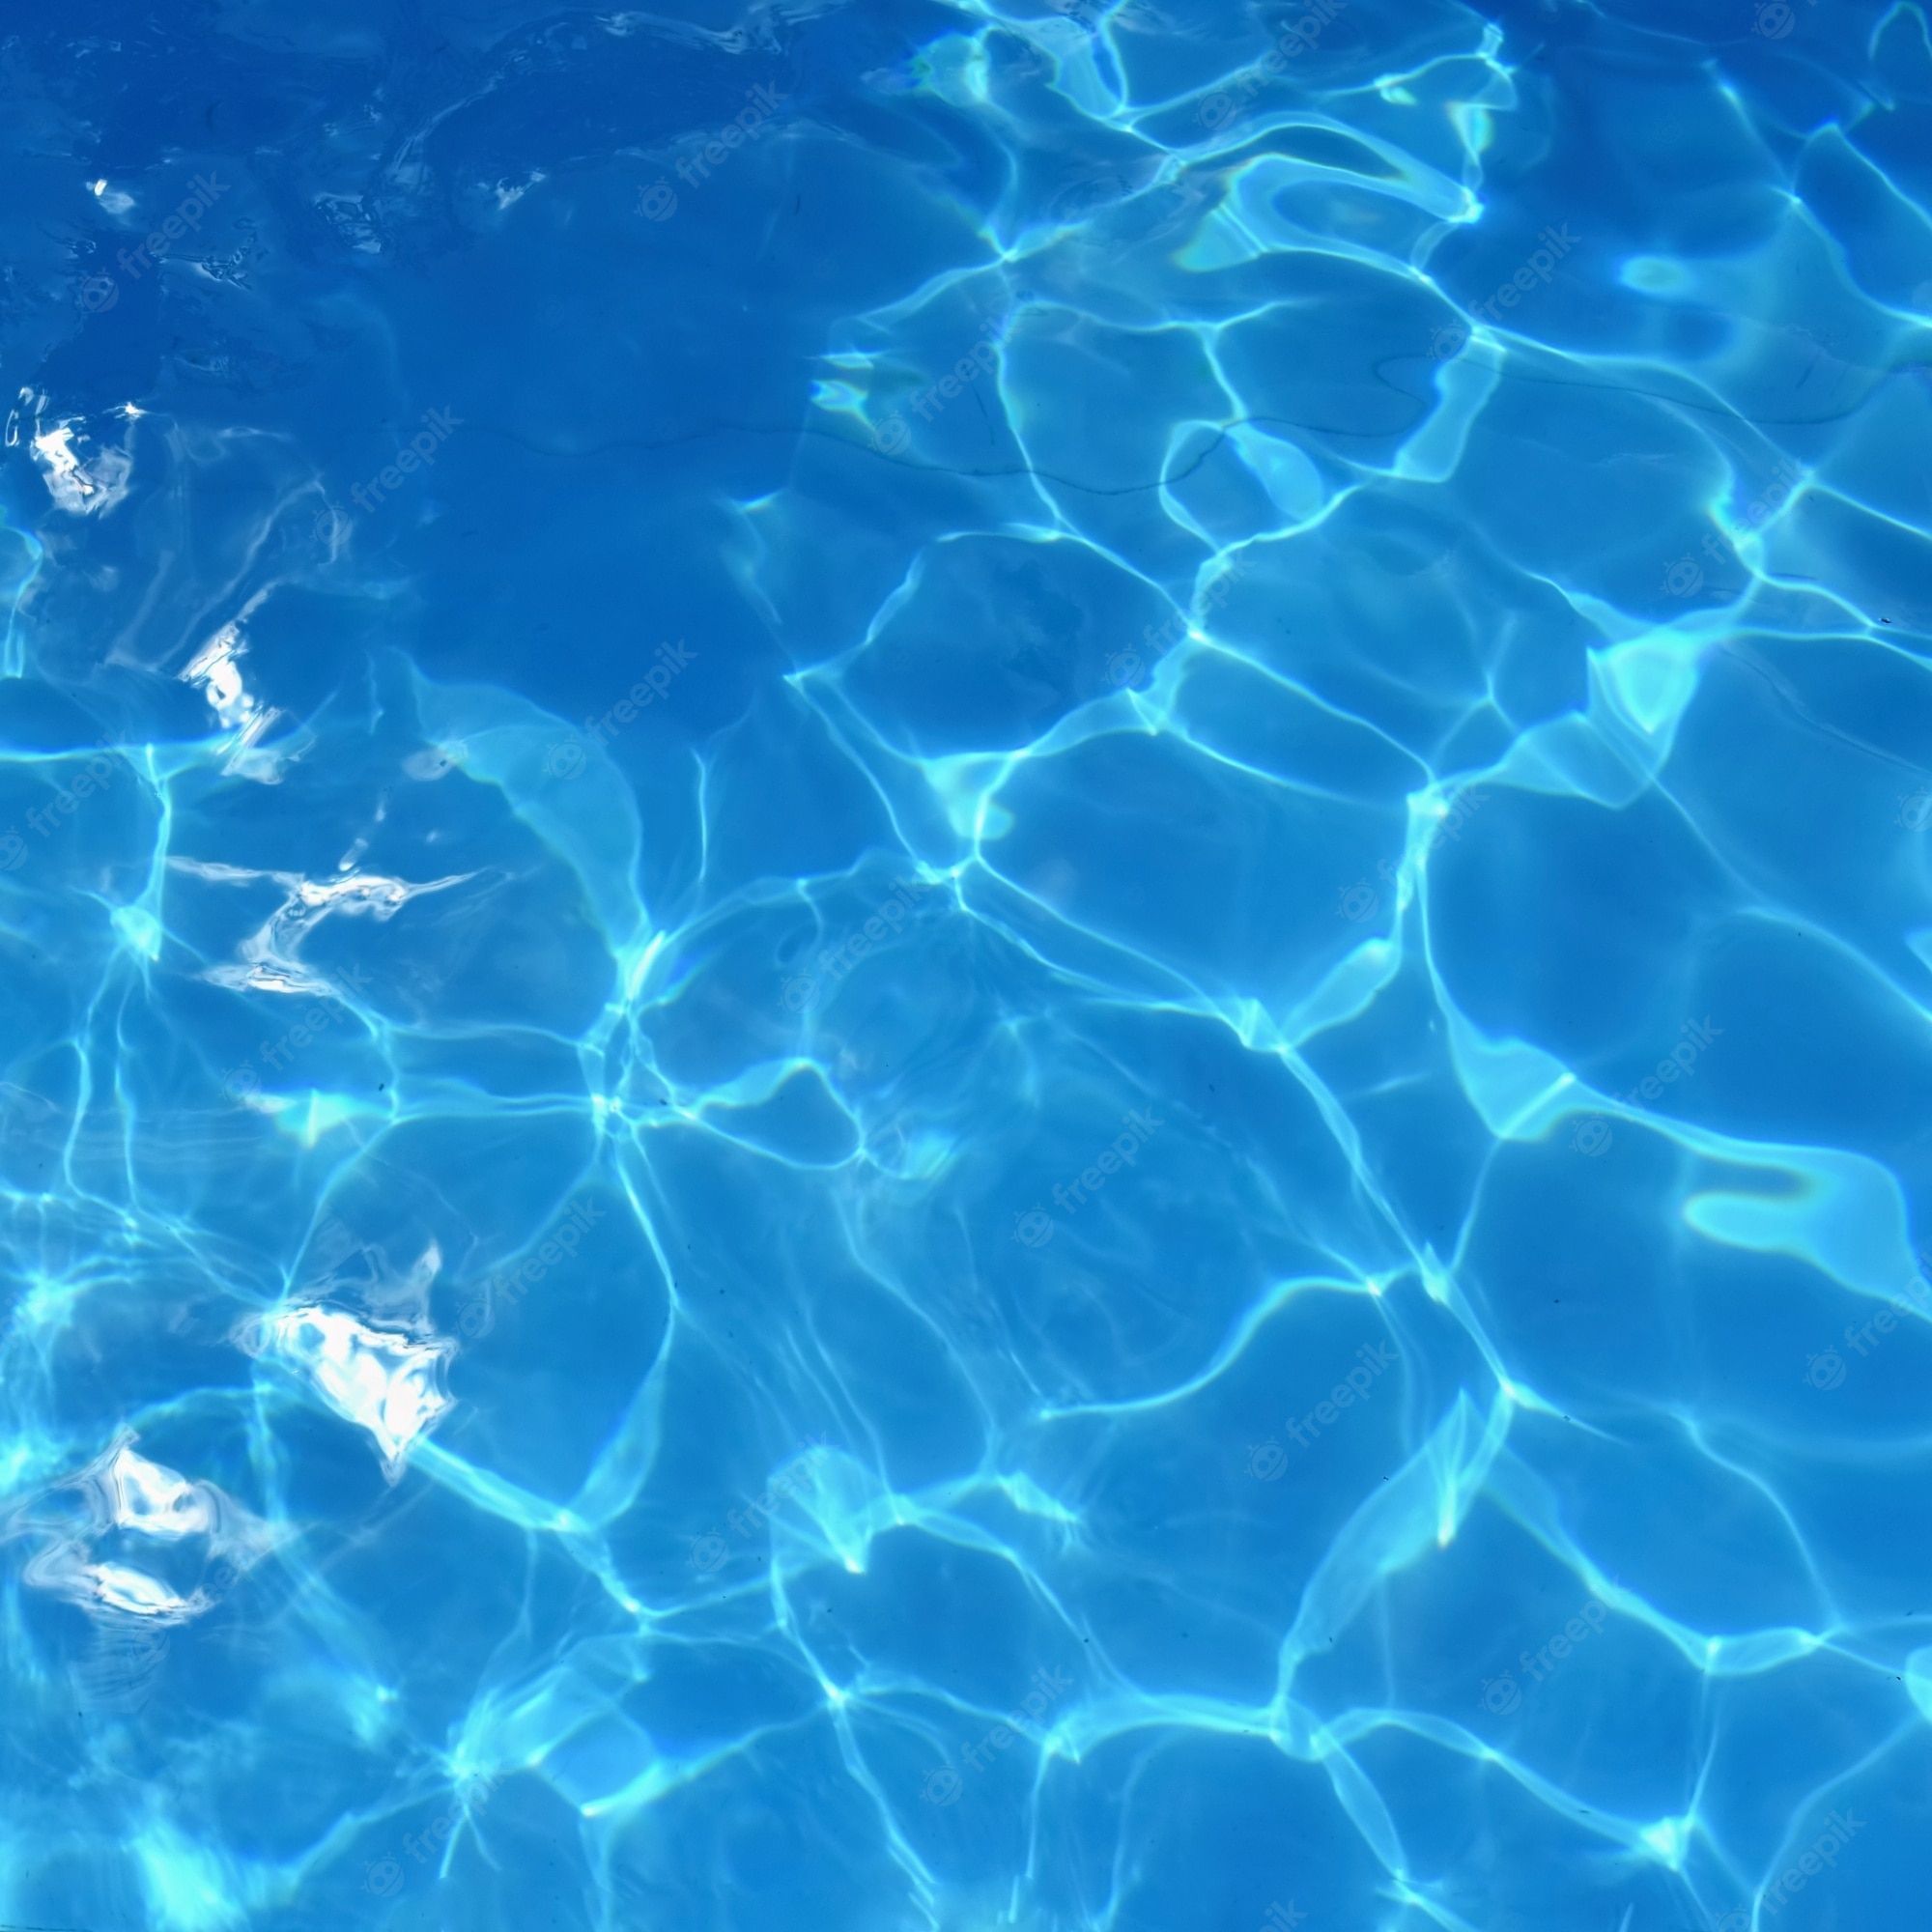 A pool with crystal clear blue water - Water, swimming pool